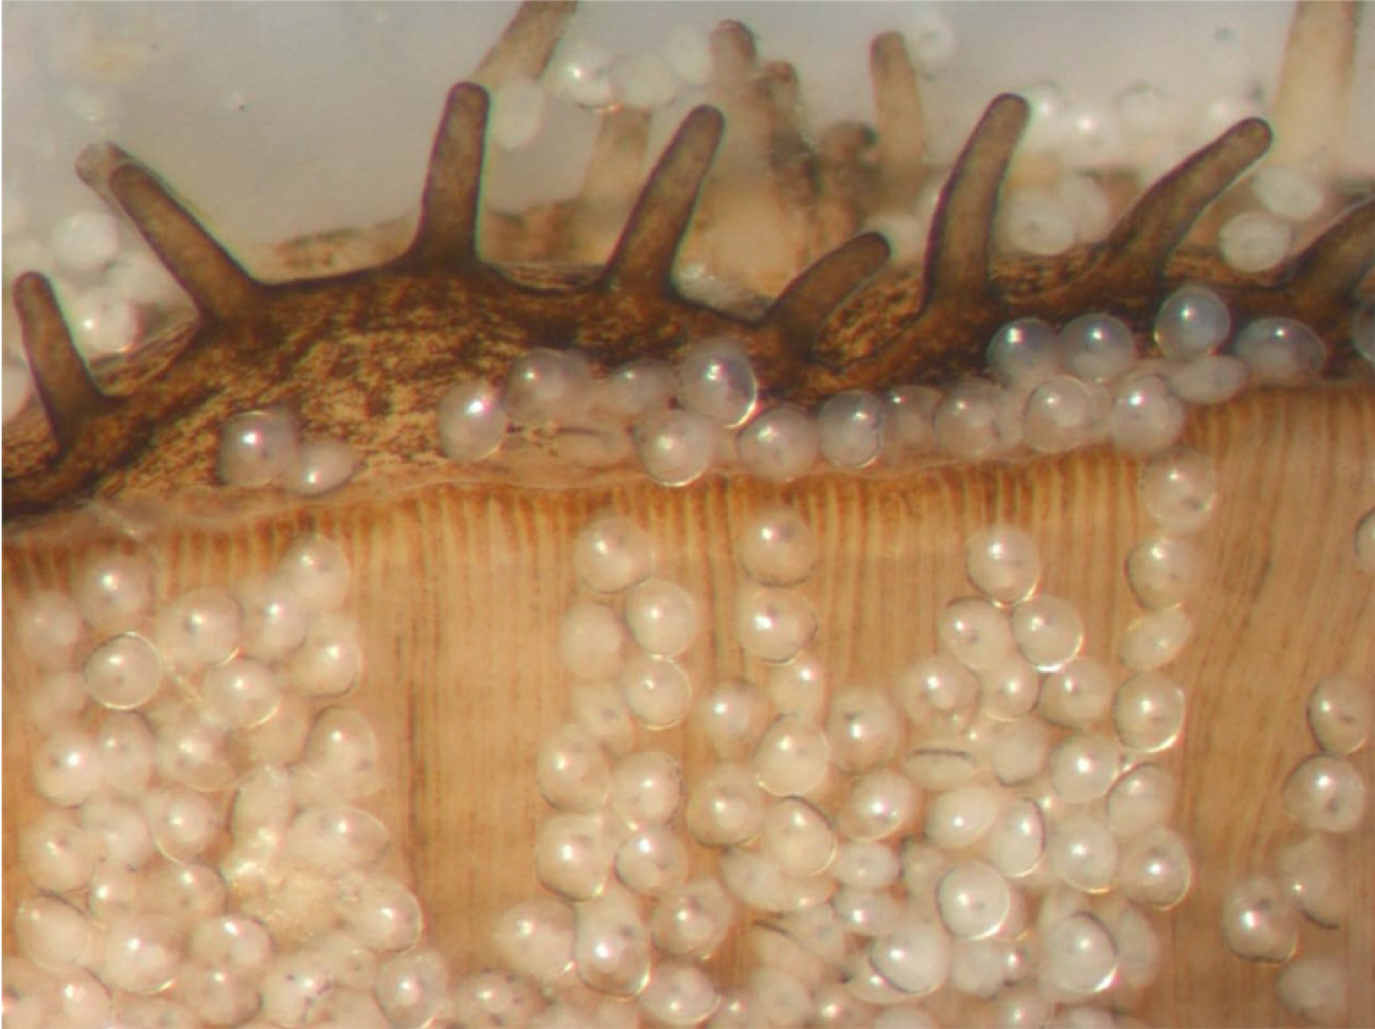 Close up of oyster larvae being brooded inside mother.